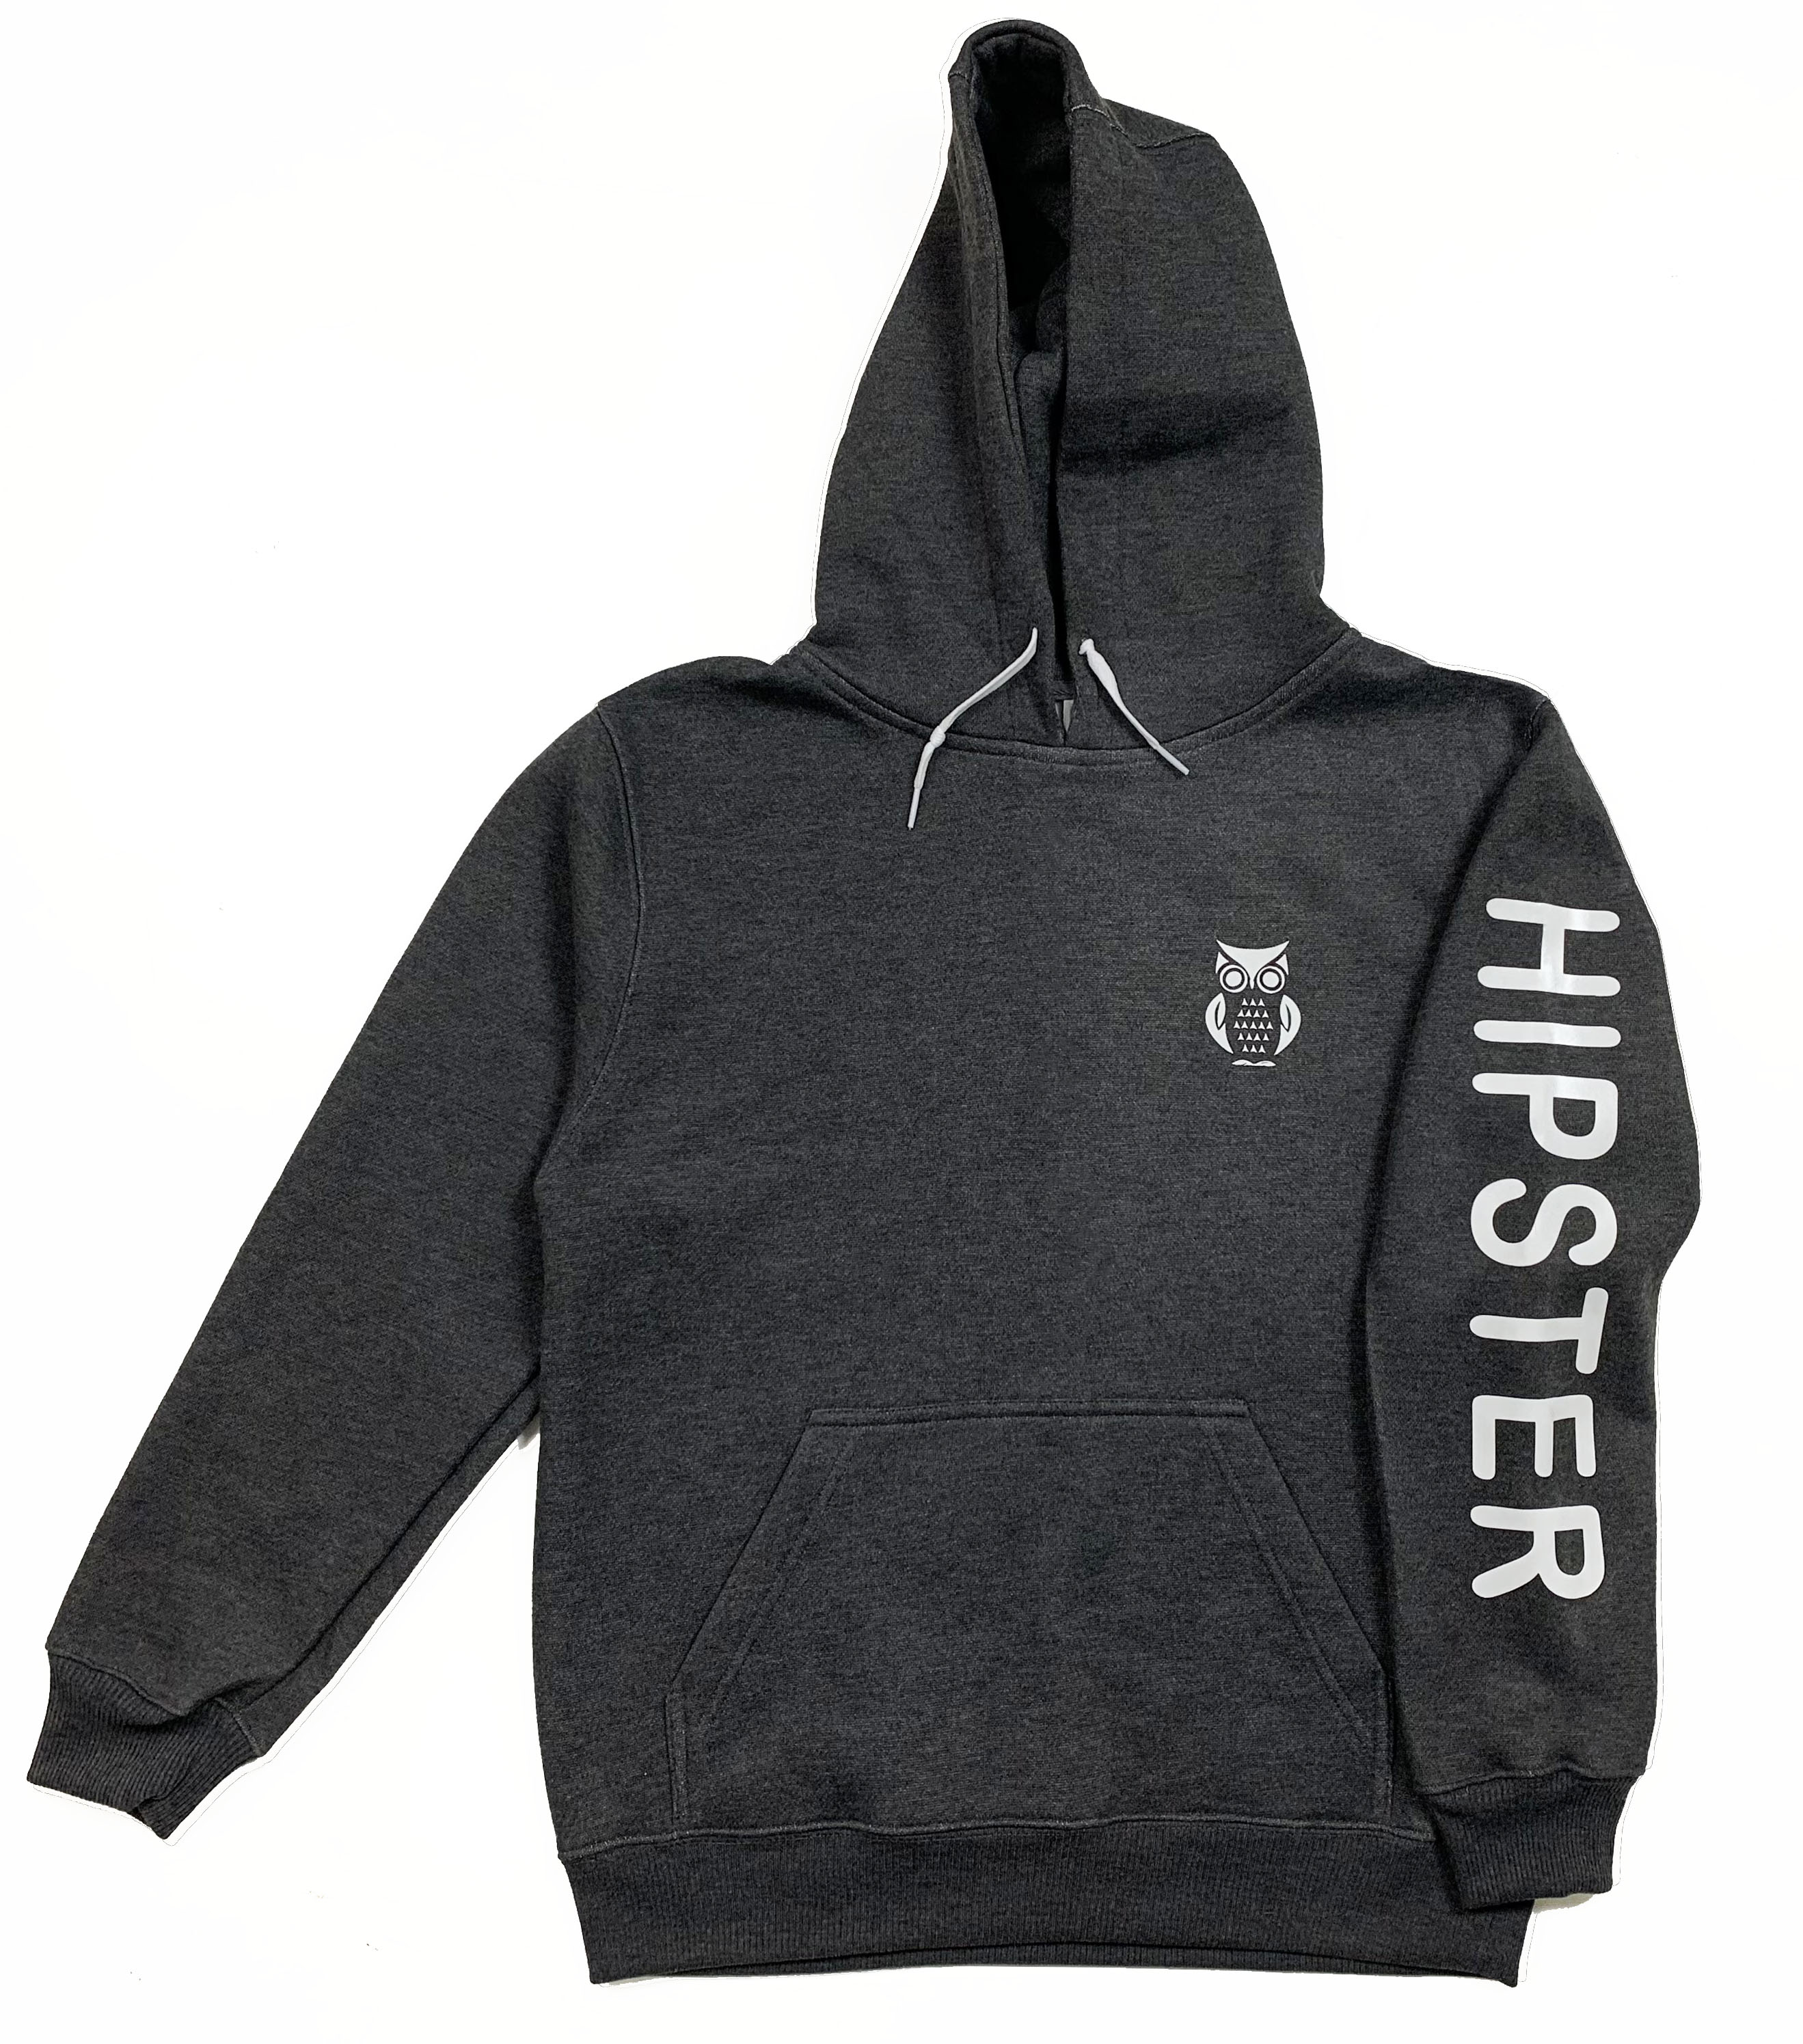 Hoodie with the Hipster logo and print